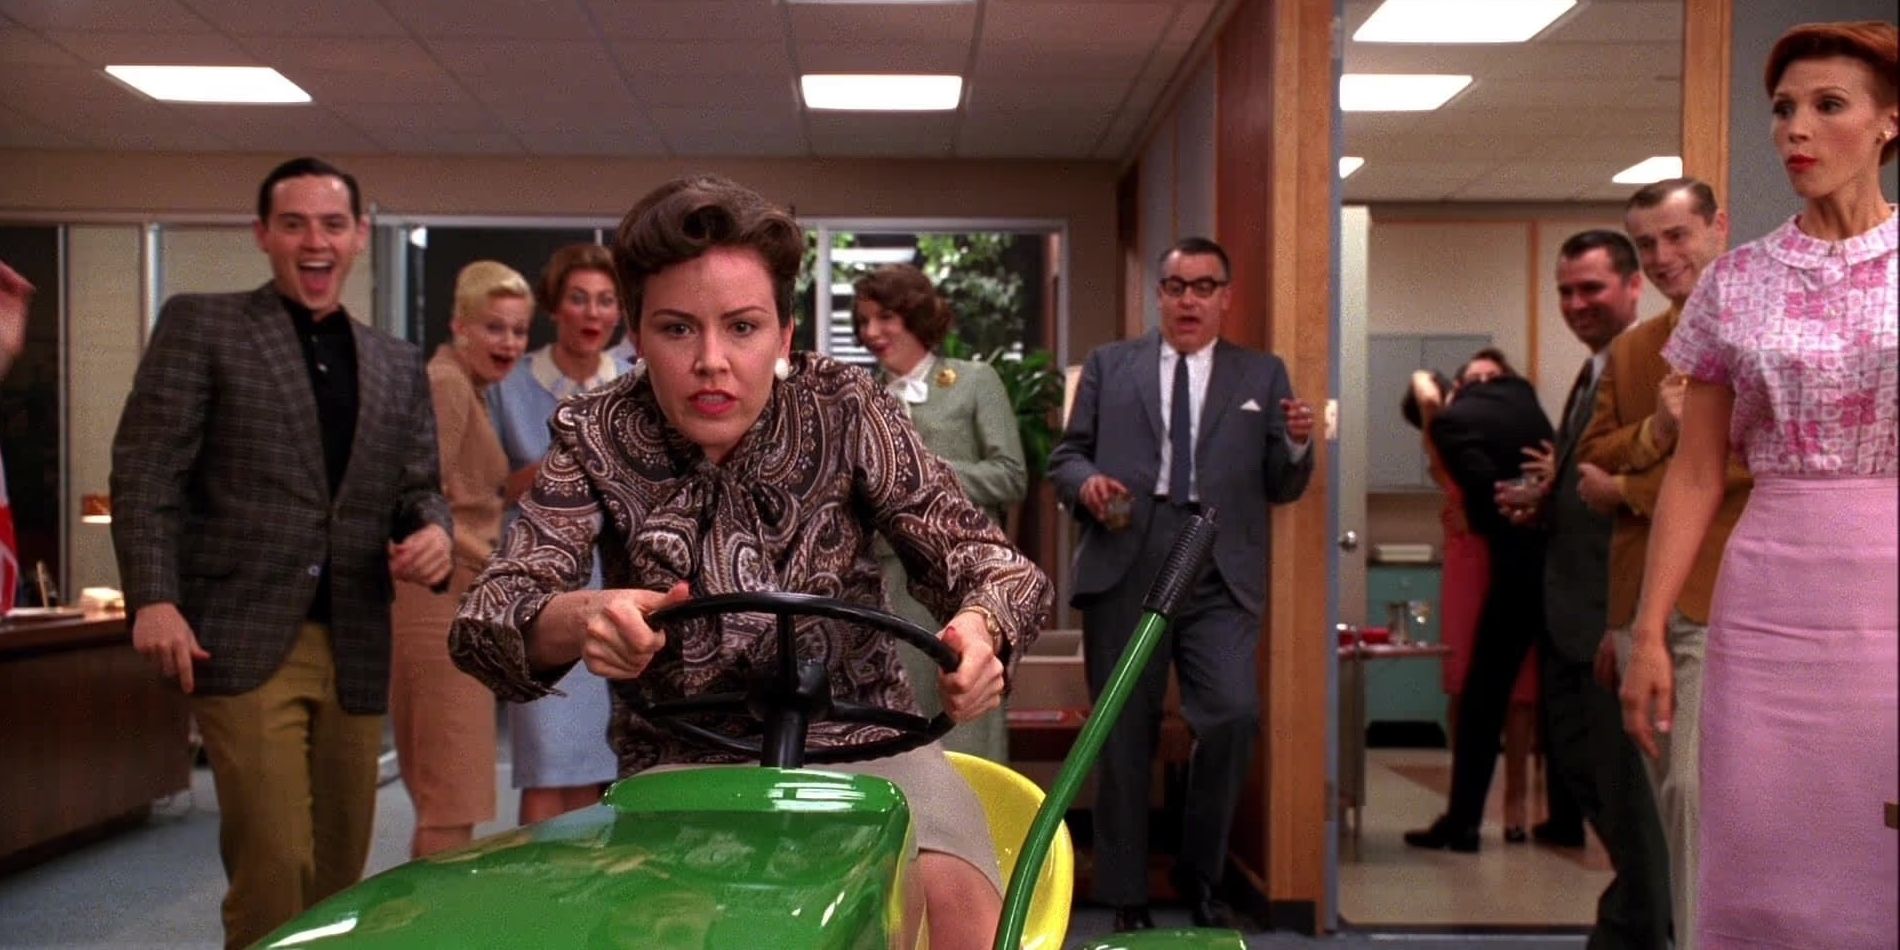 Lois driving the lawnmower in Mad Men season 3 episode Guy Walks Into An Advertising Agency